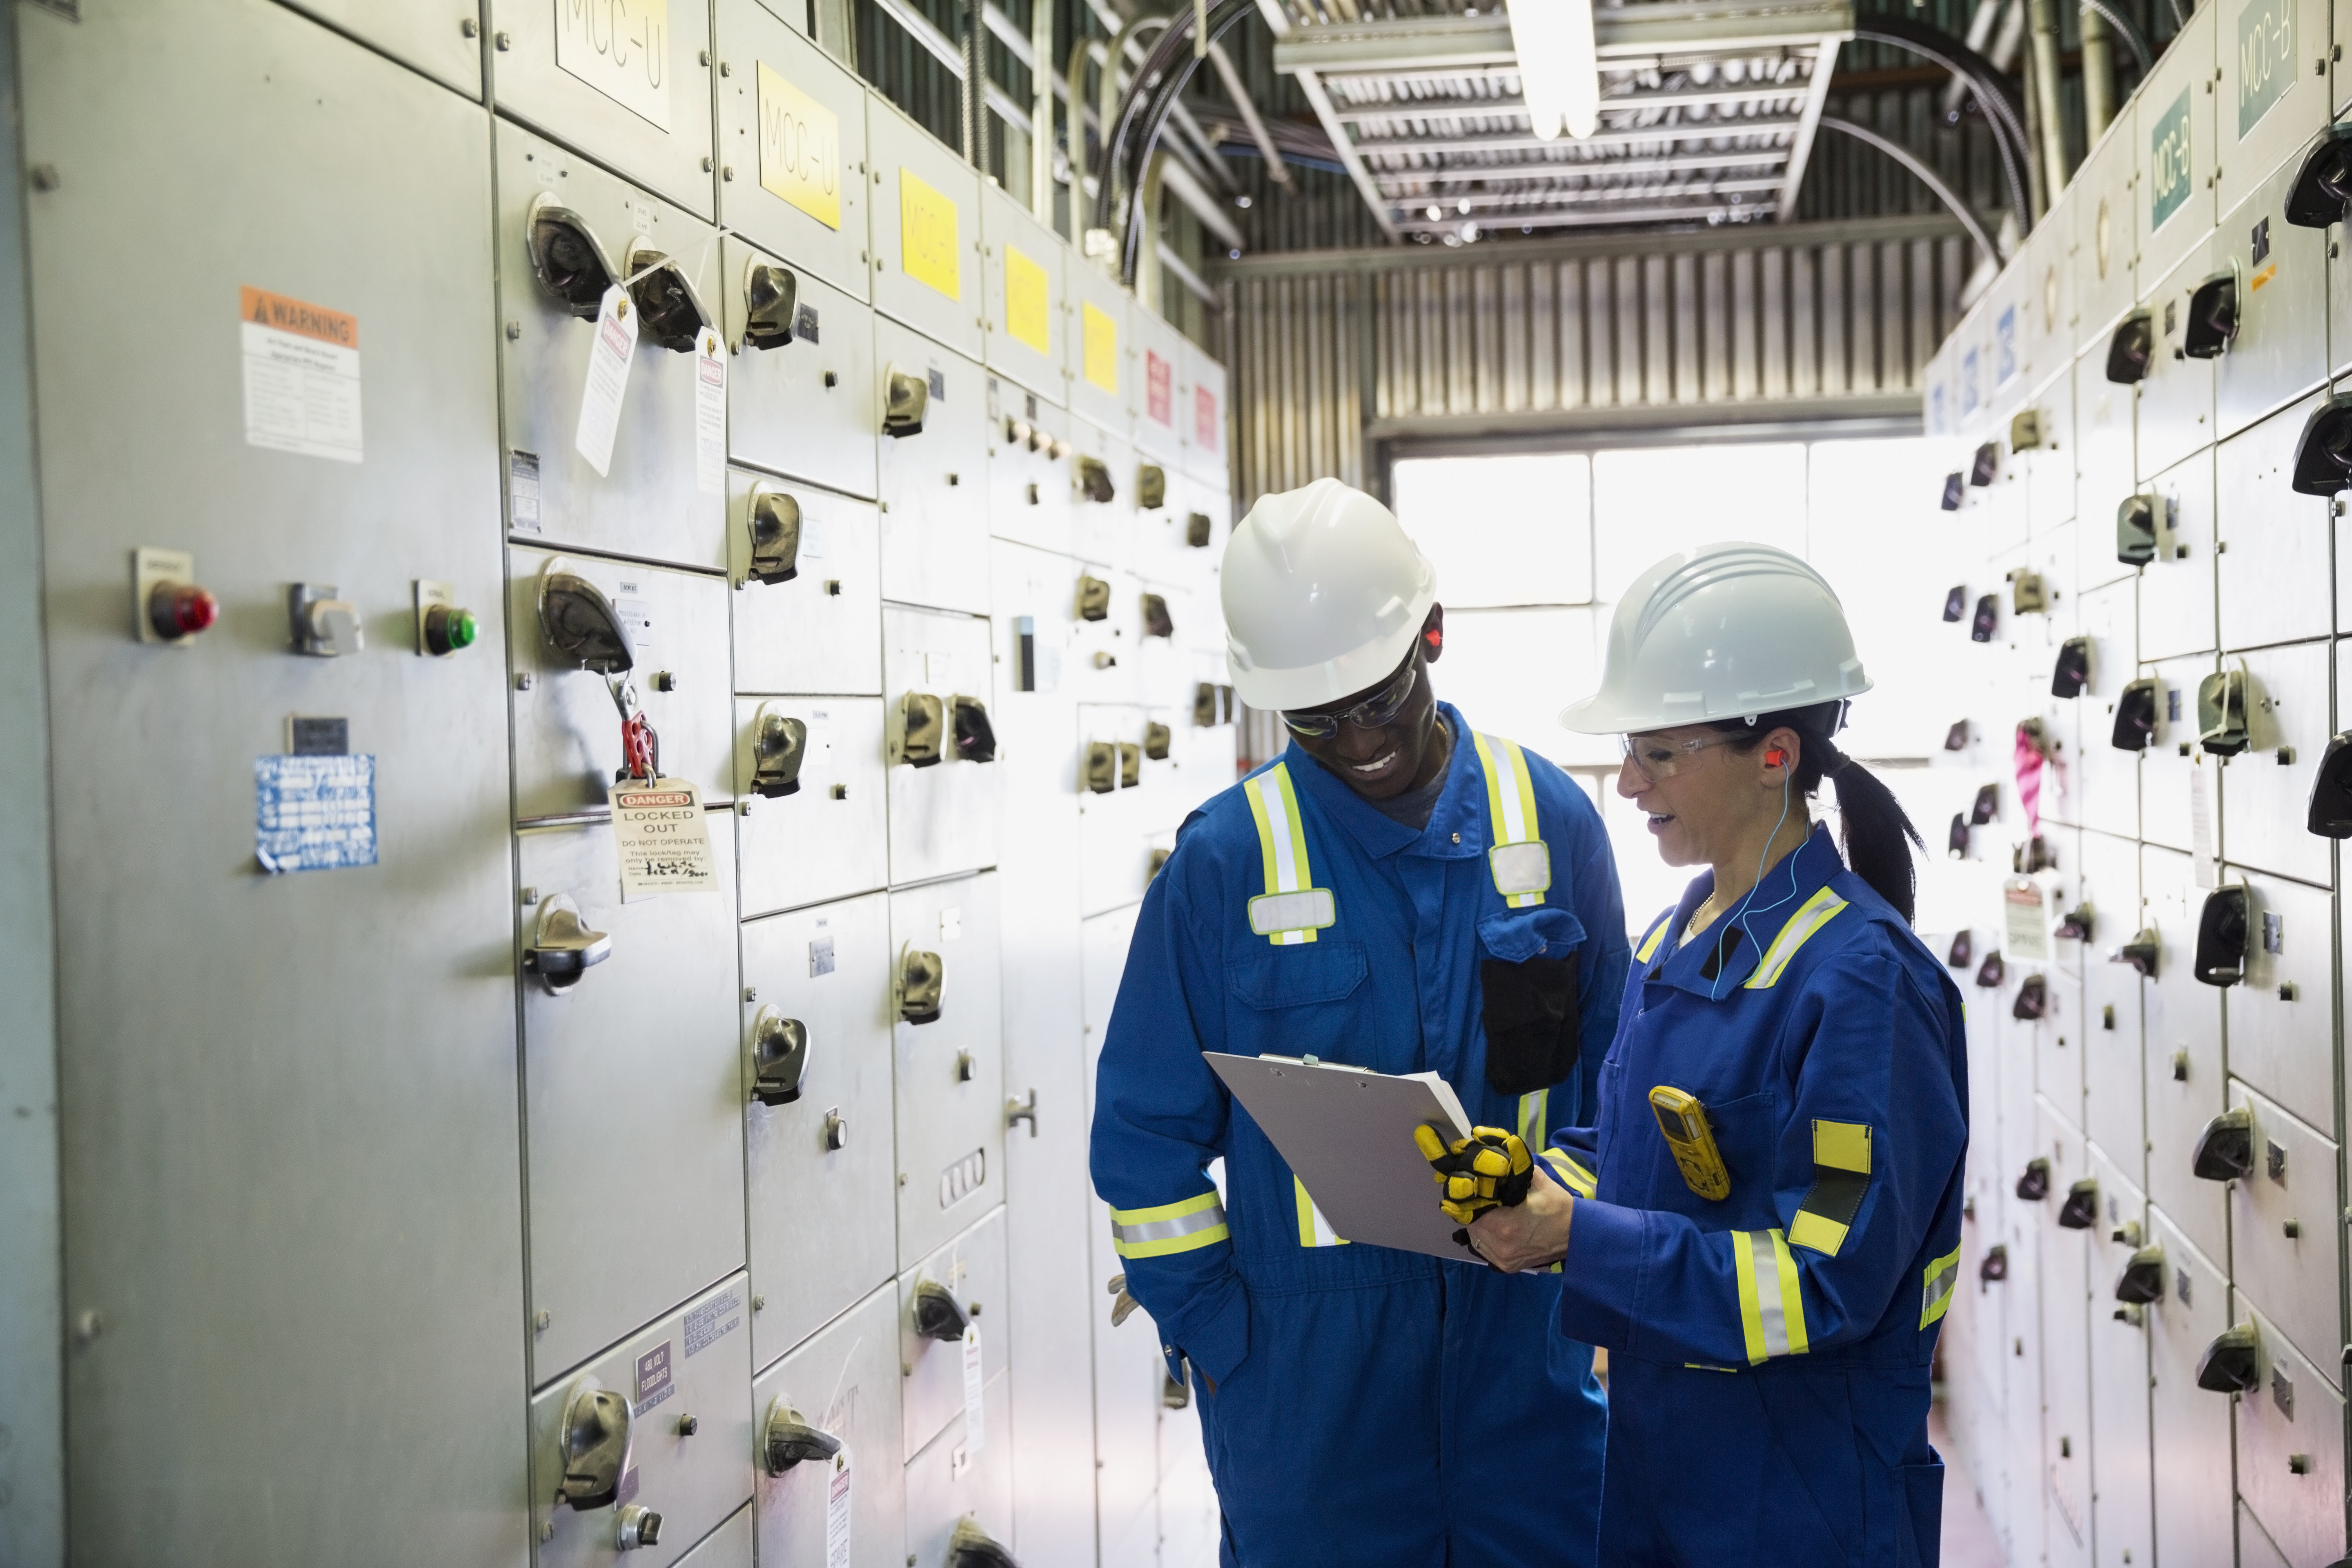 Schneider Electric Launches Partnerships of the Future - All of the Latest  Oil and Gas News-Find Oil and Gas Jobs